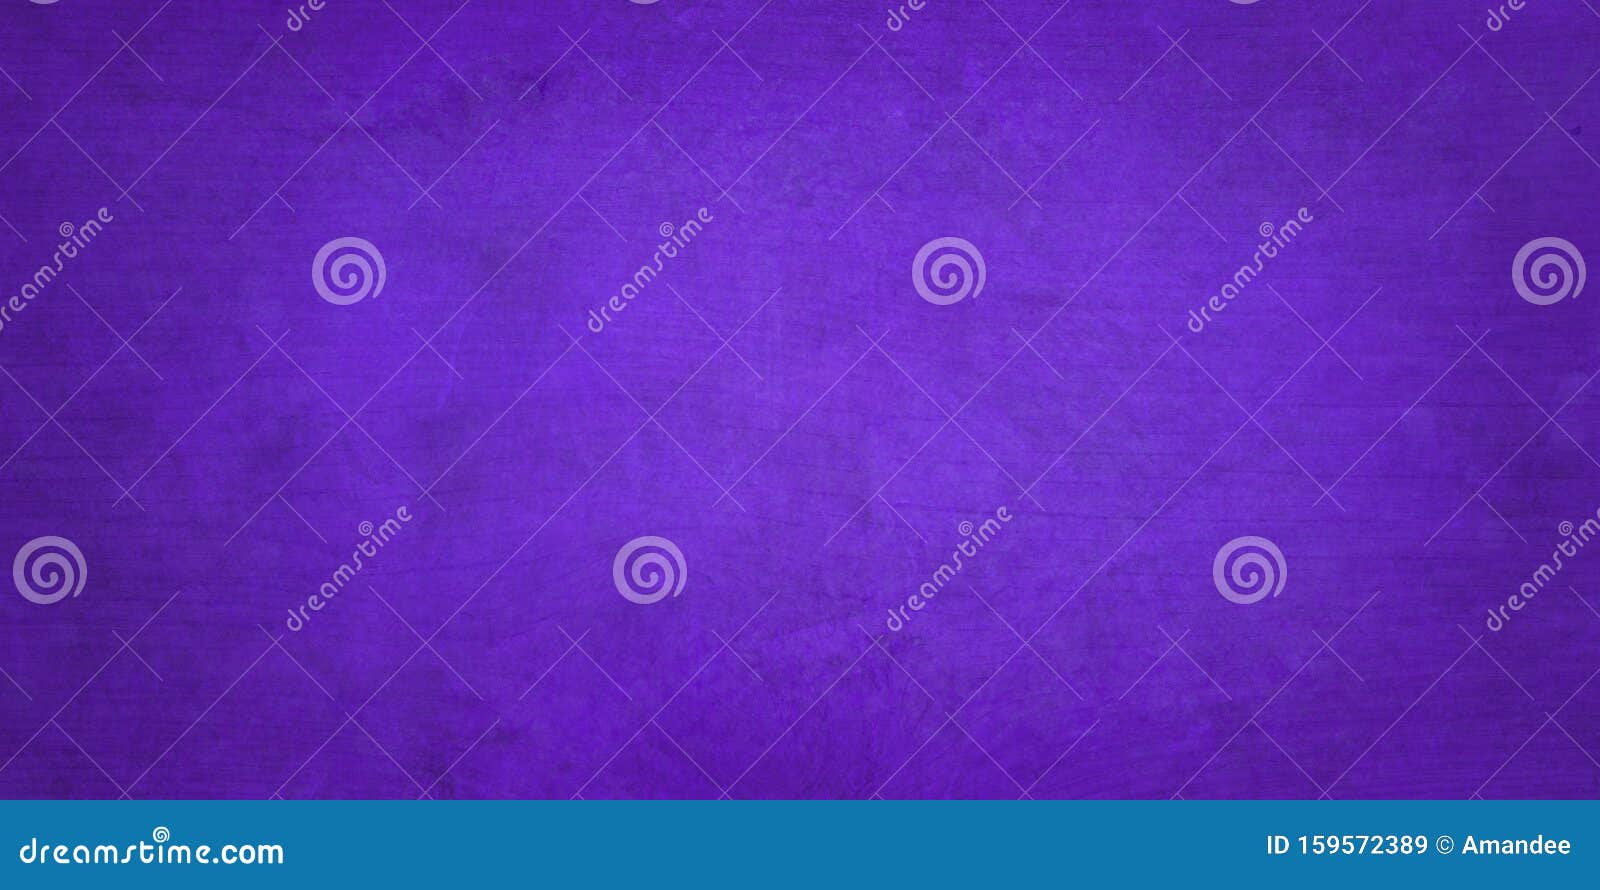 purple background with faint weathered barn wood texture and old vintage grunge